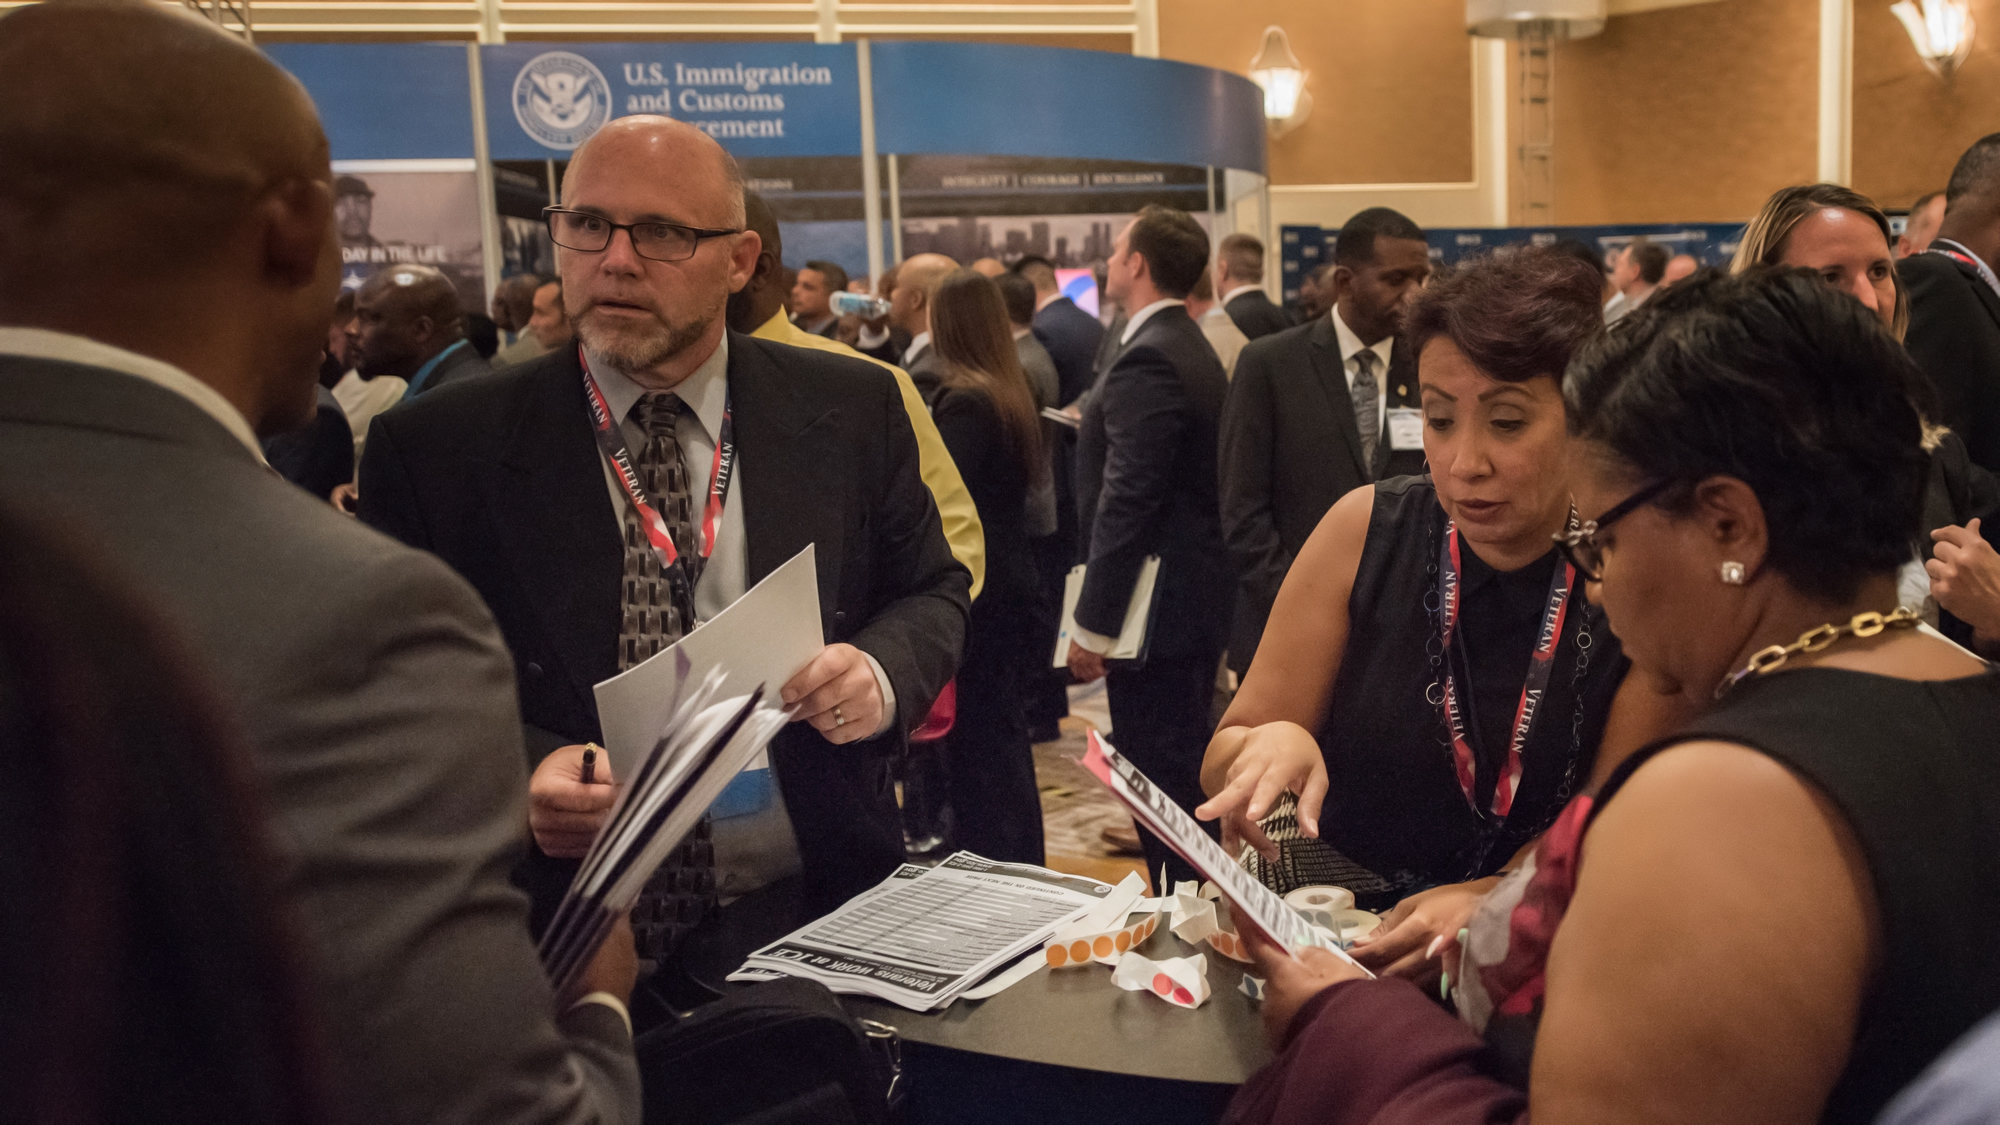 ICE’s M&A employees join DHS recruitment officials Aug. 22-23 for an event aimed at hiring veterans of the Armed Services. DHS as a whole currently employs more than 50,000 veterans.